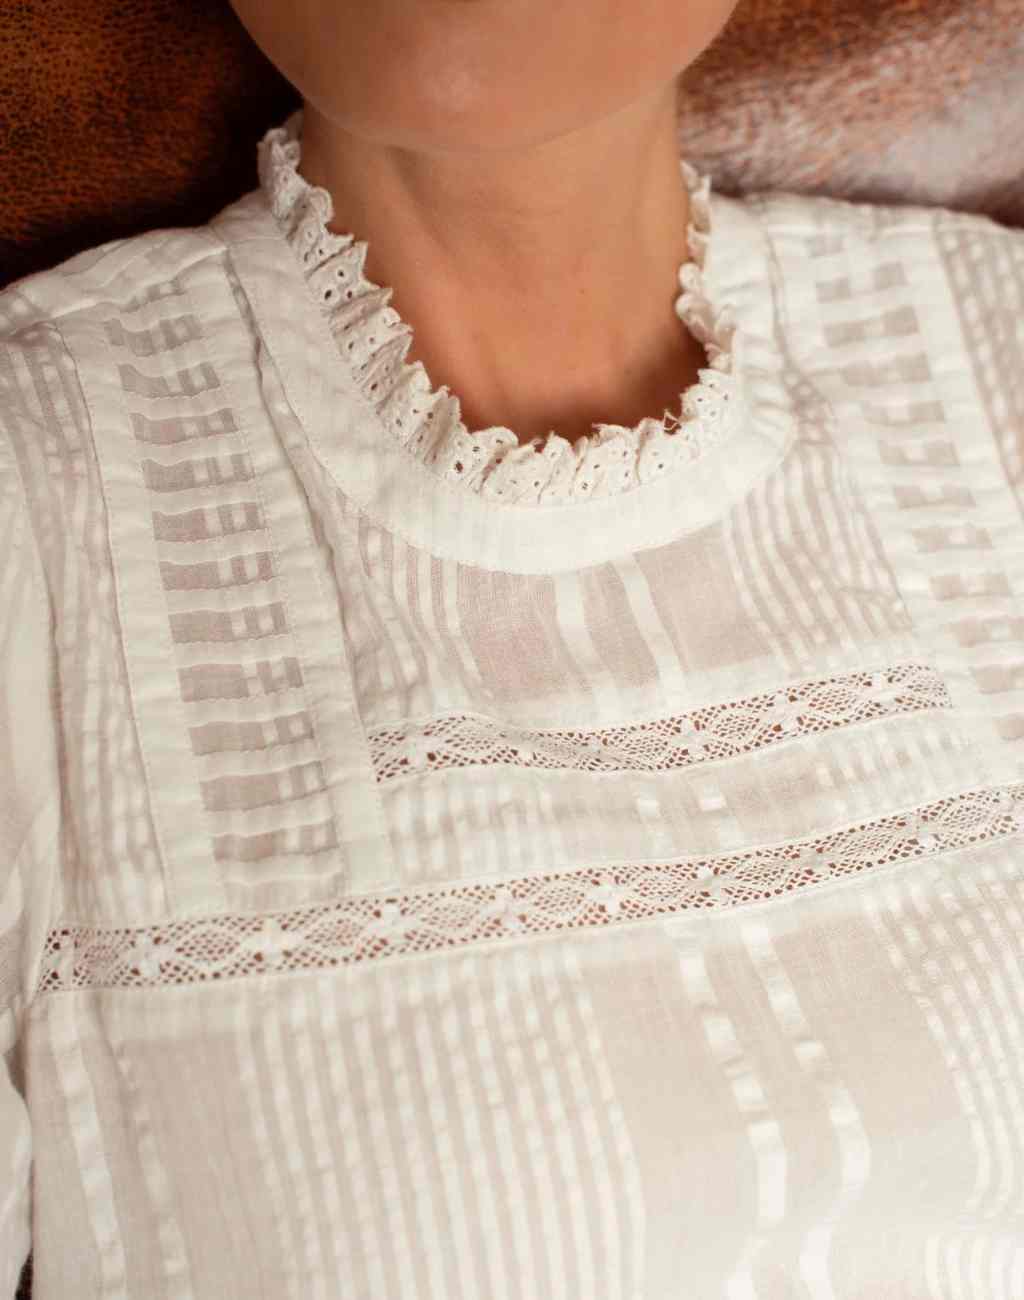 White Ruby Blouse with Pintucks at Neck and Hem | Seersucker and Lace Details - Visit Nifty Ophelia &amp; Indigo 